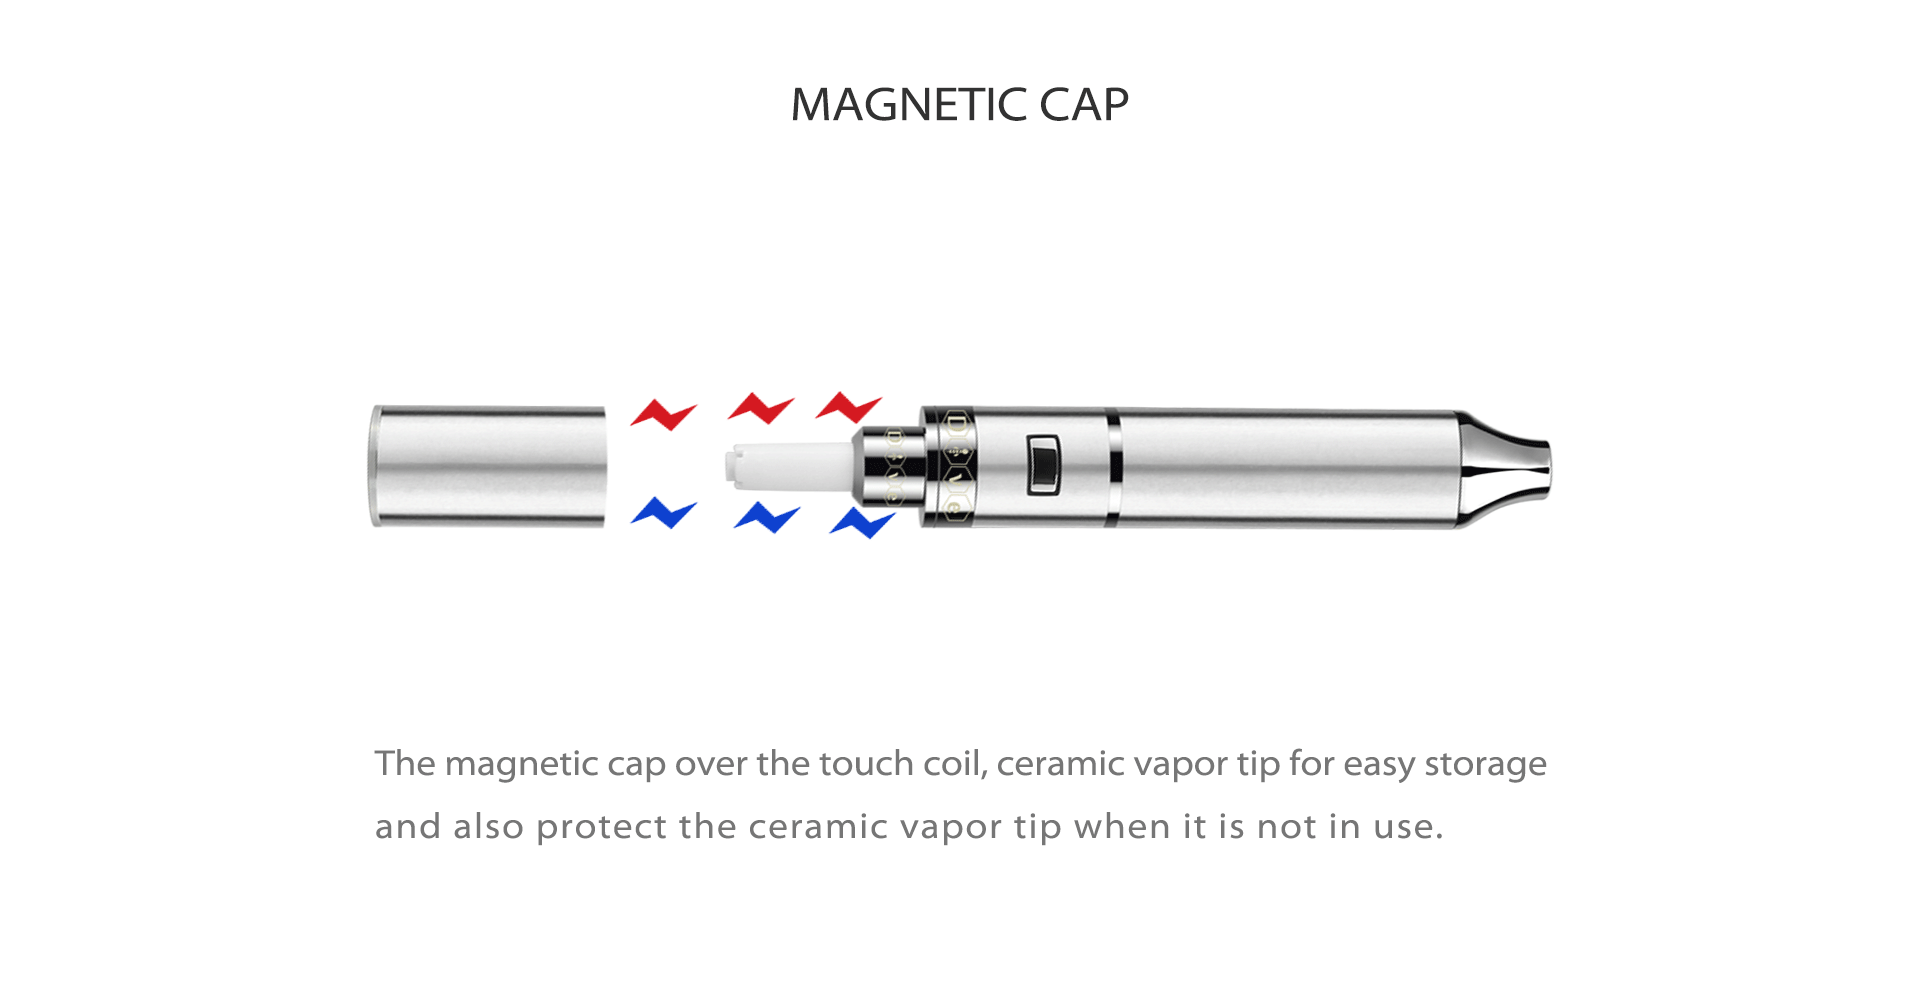 The Yocan magnetic cap over the touch coil, ceramic vapor tip for easy storage.